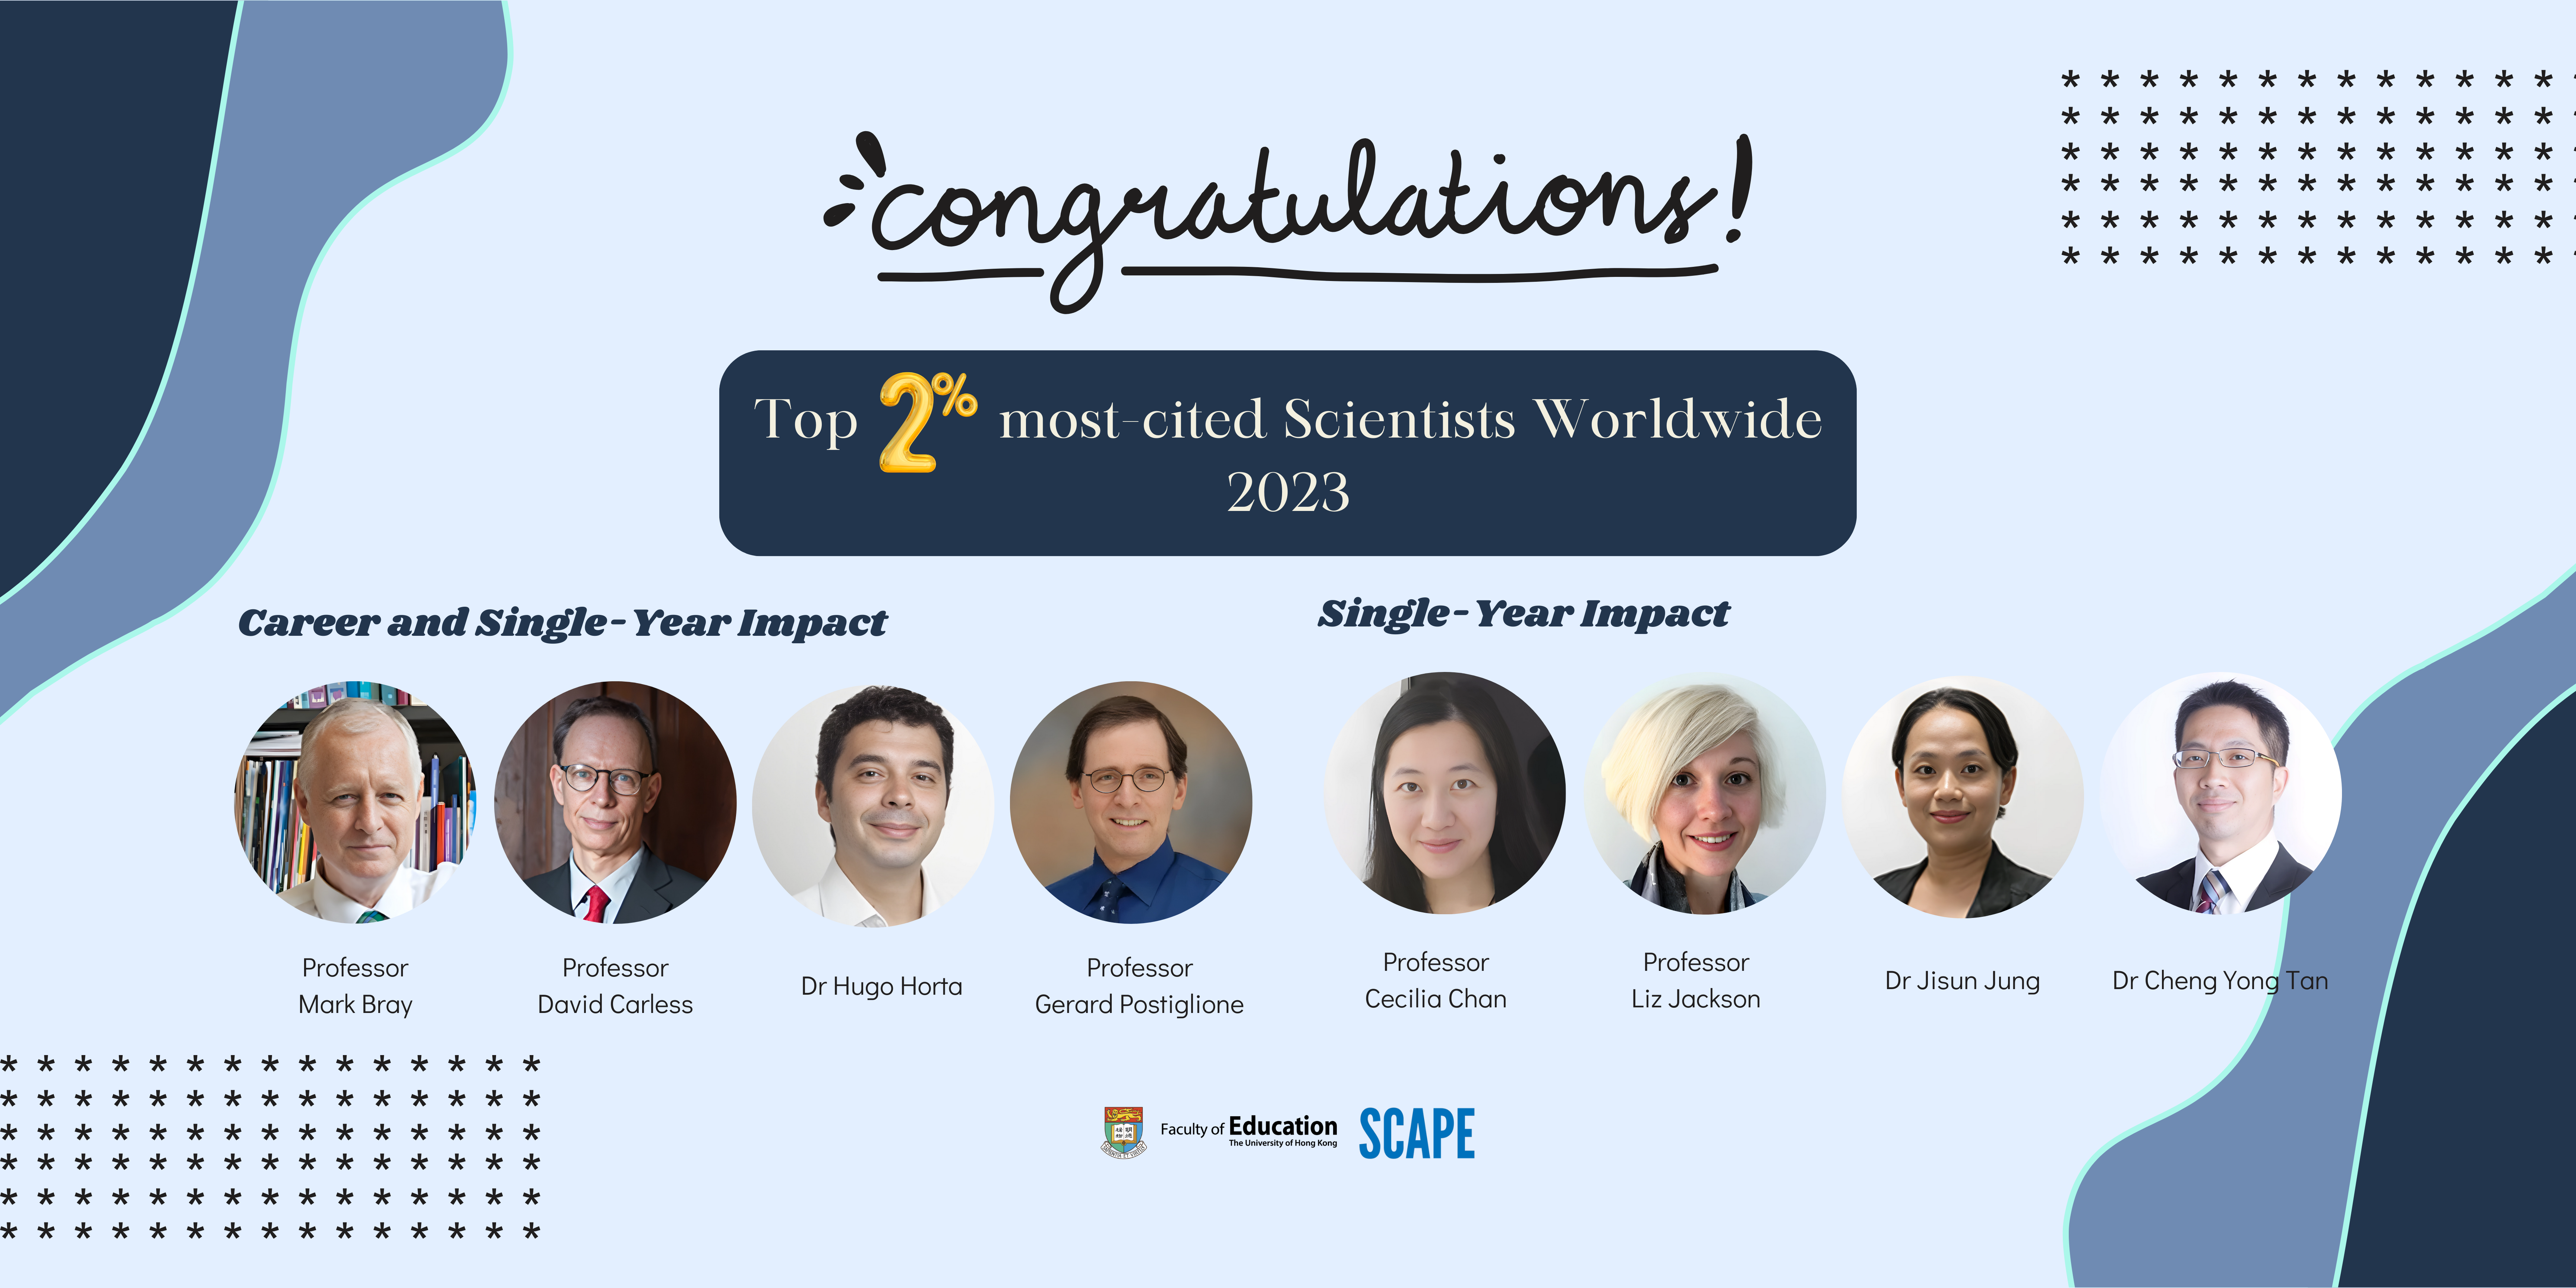 Top 2% most-cited Scientists Worldwide 2023 (6912 x 3456 px)